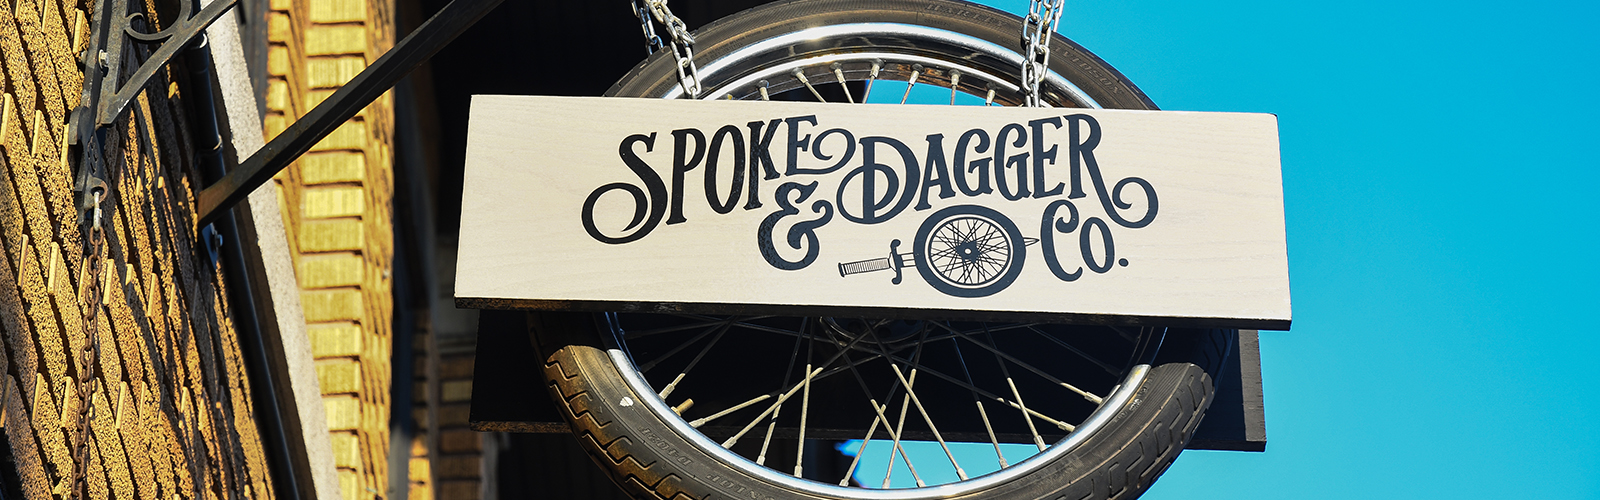 Spoke & Dagger Co., located at 1434 Hertel Ave., Buffalo, is identifiable by its swinging tire sign.